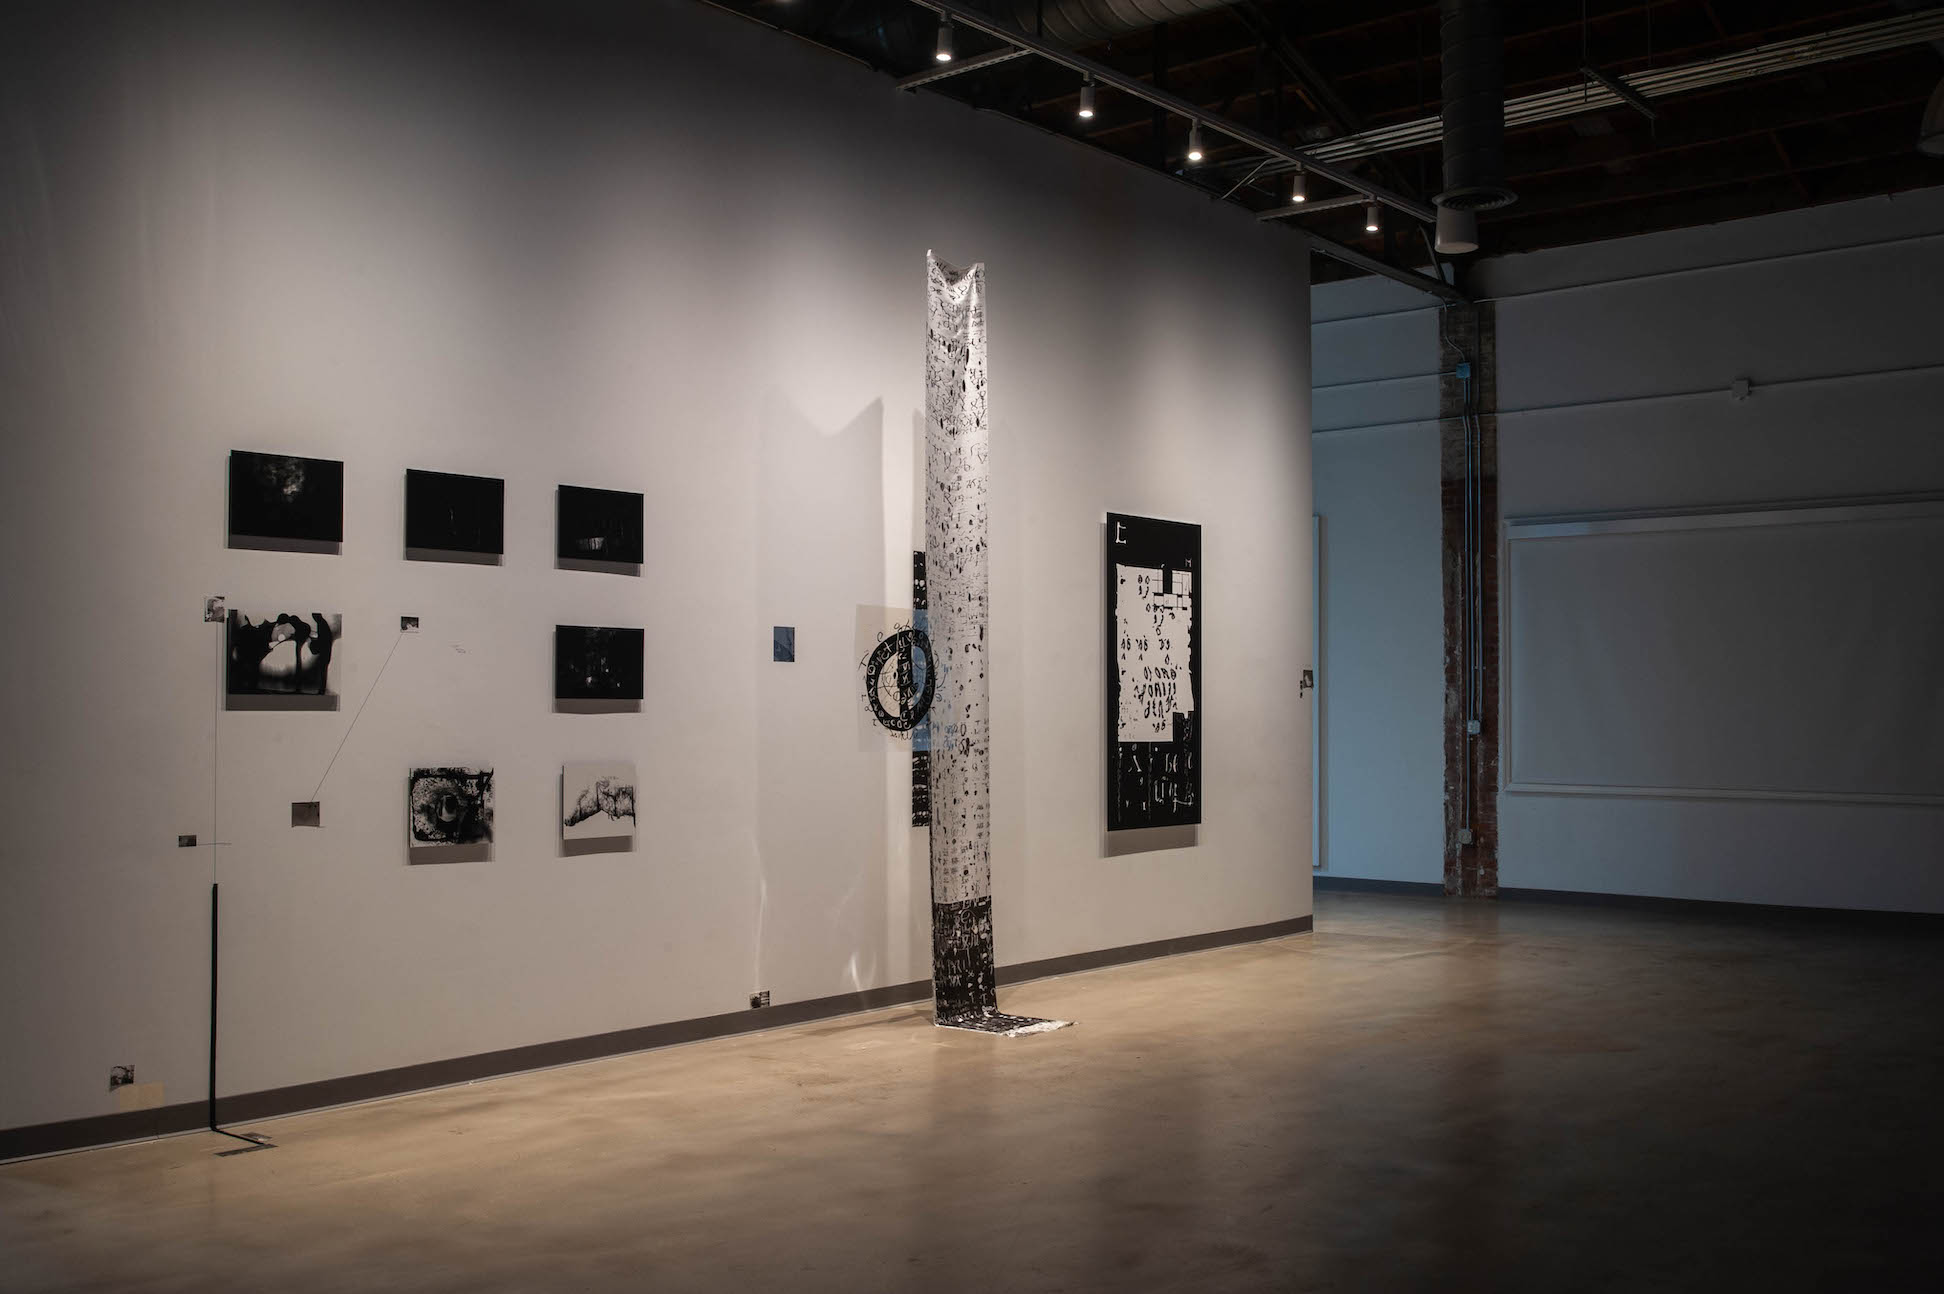 An exhibition view of one wall, with a tall narrow black and white column in the center, with groupings of black and white images on either side of the column.